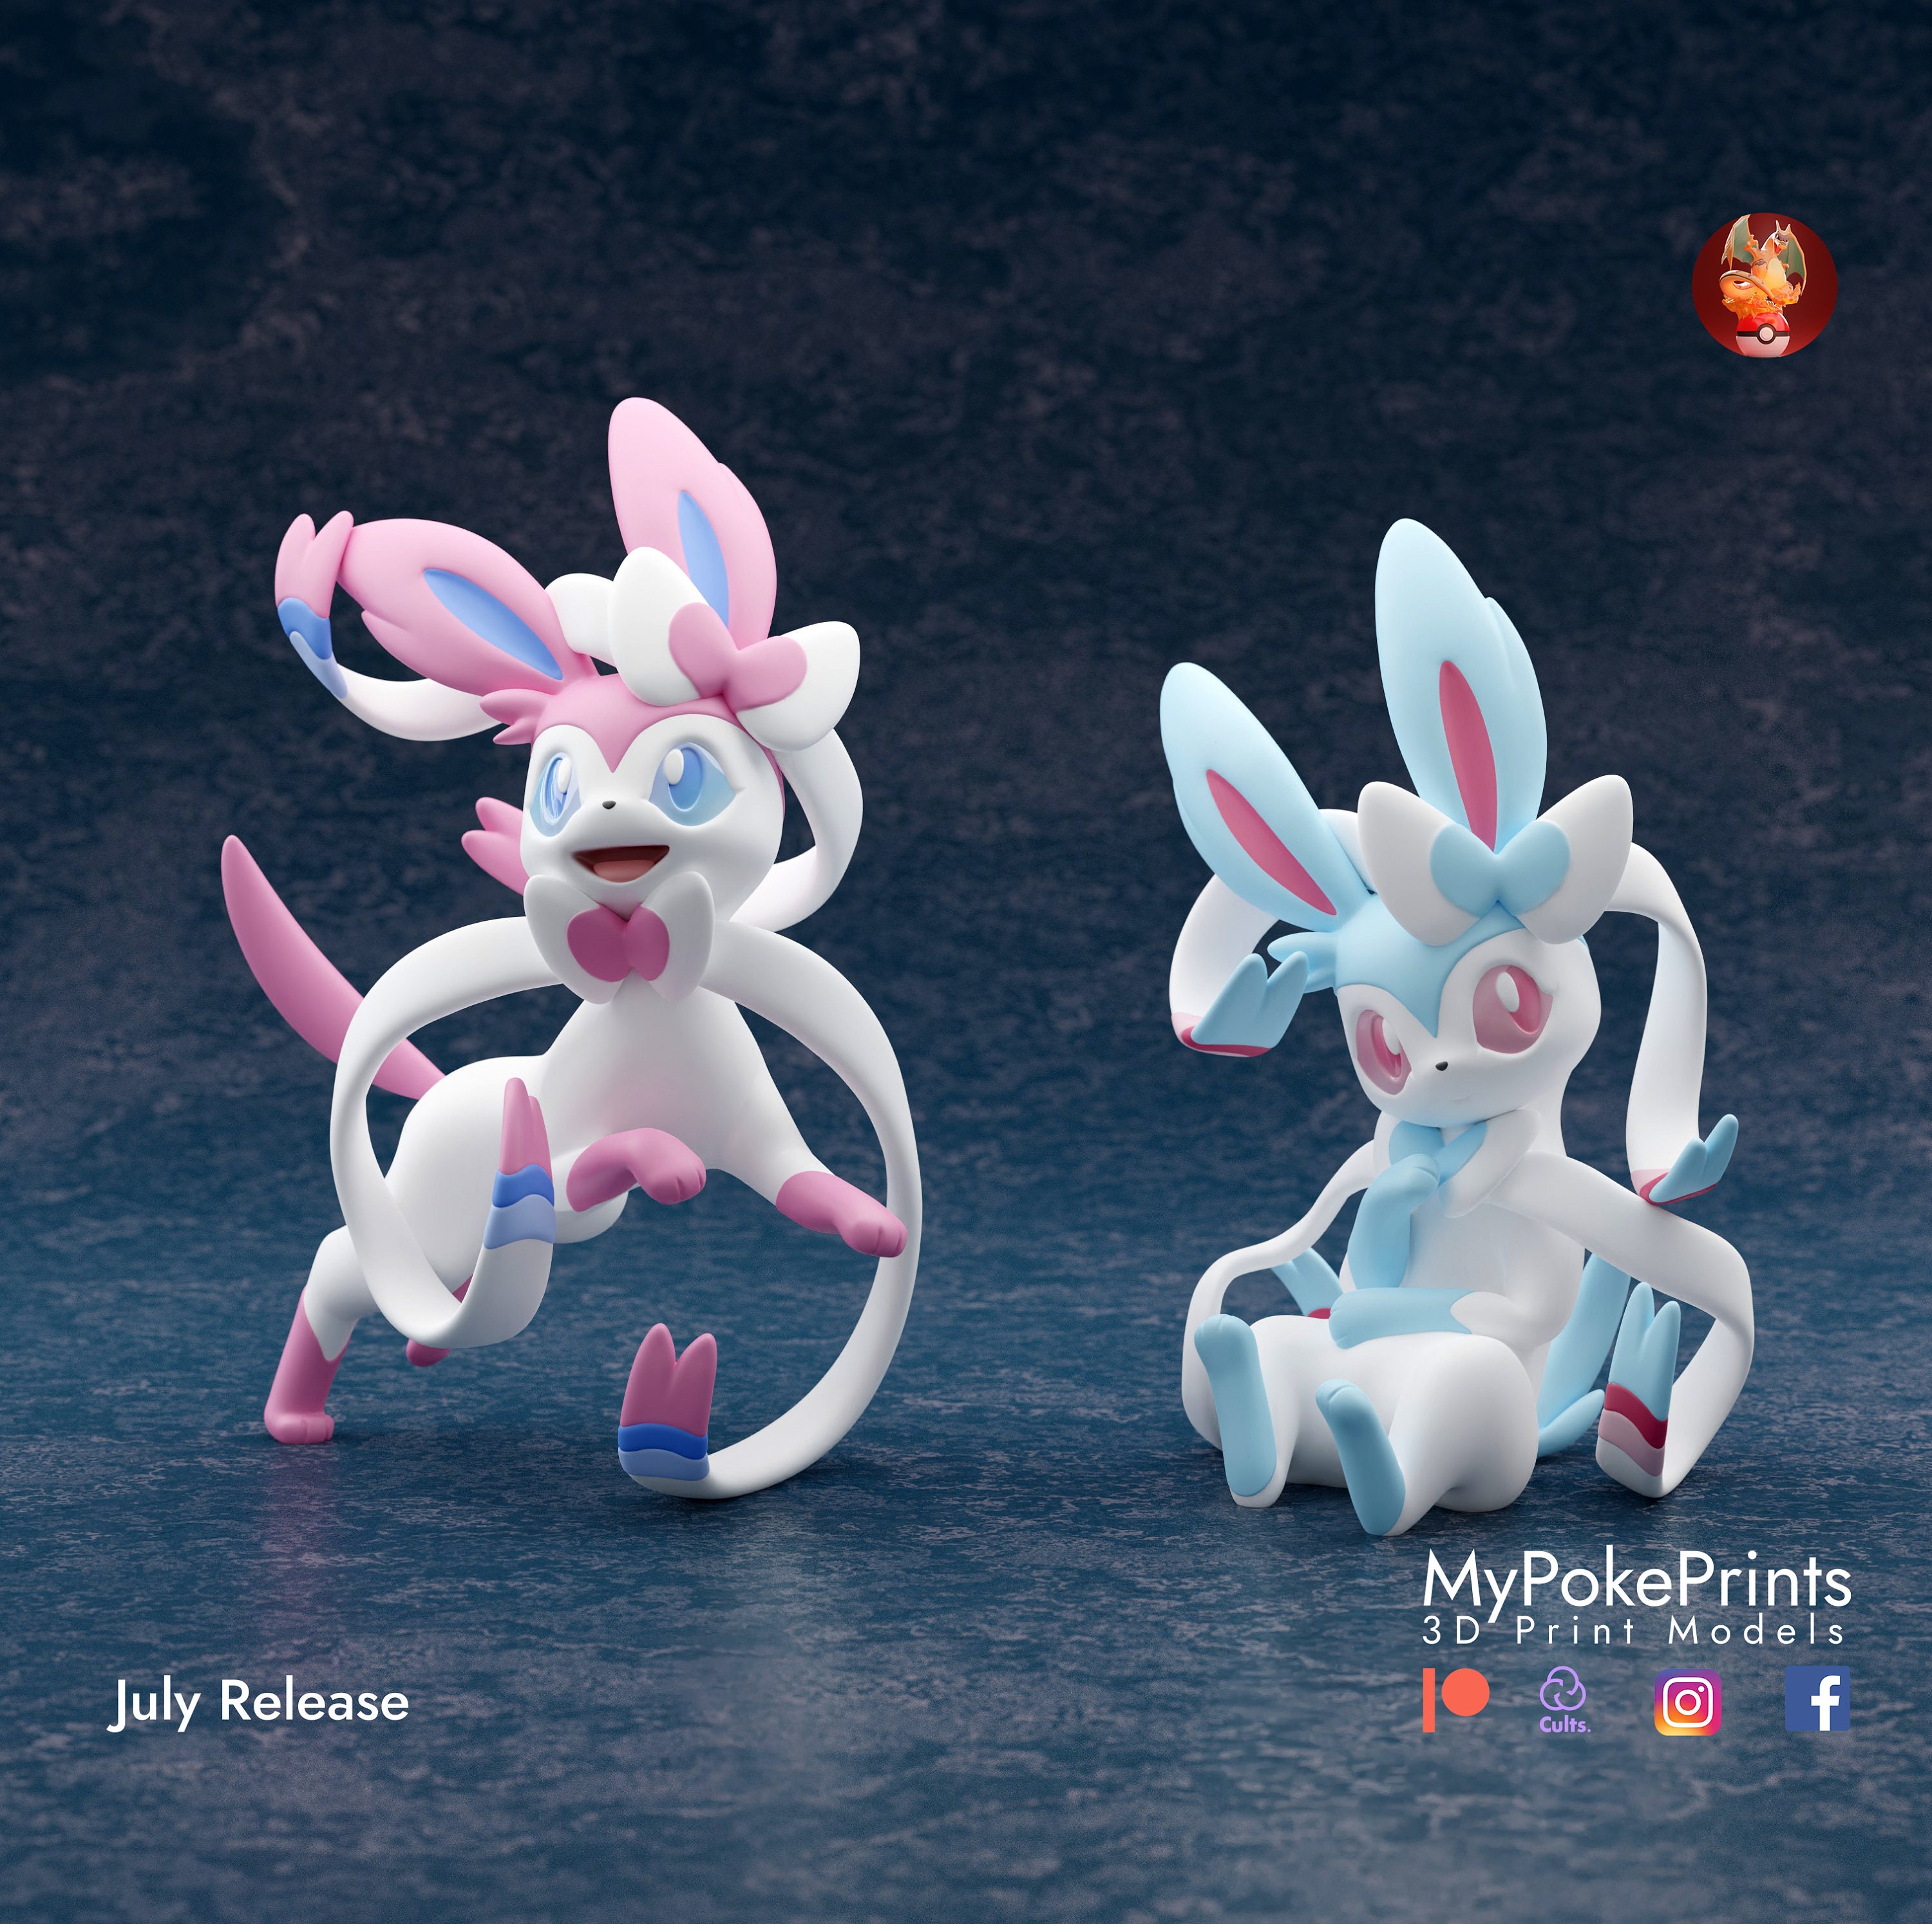 Gardevoir Pokemon Unite Collectibles pokeball Pokedex 04mm Layer Height  Painted and Unpainted Versions Available 